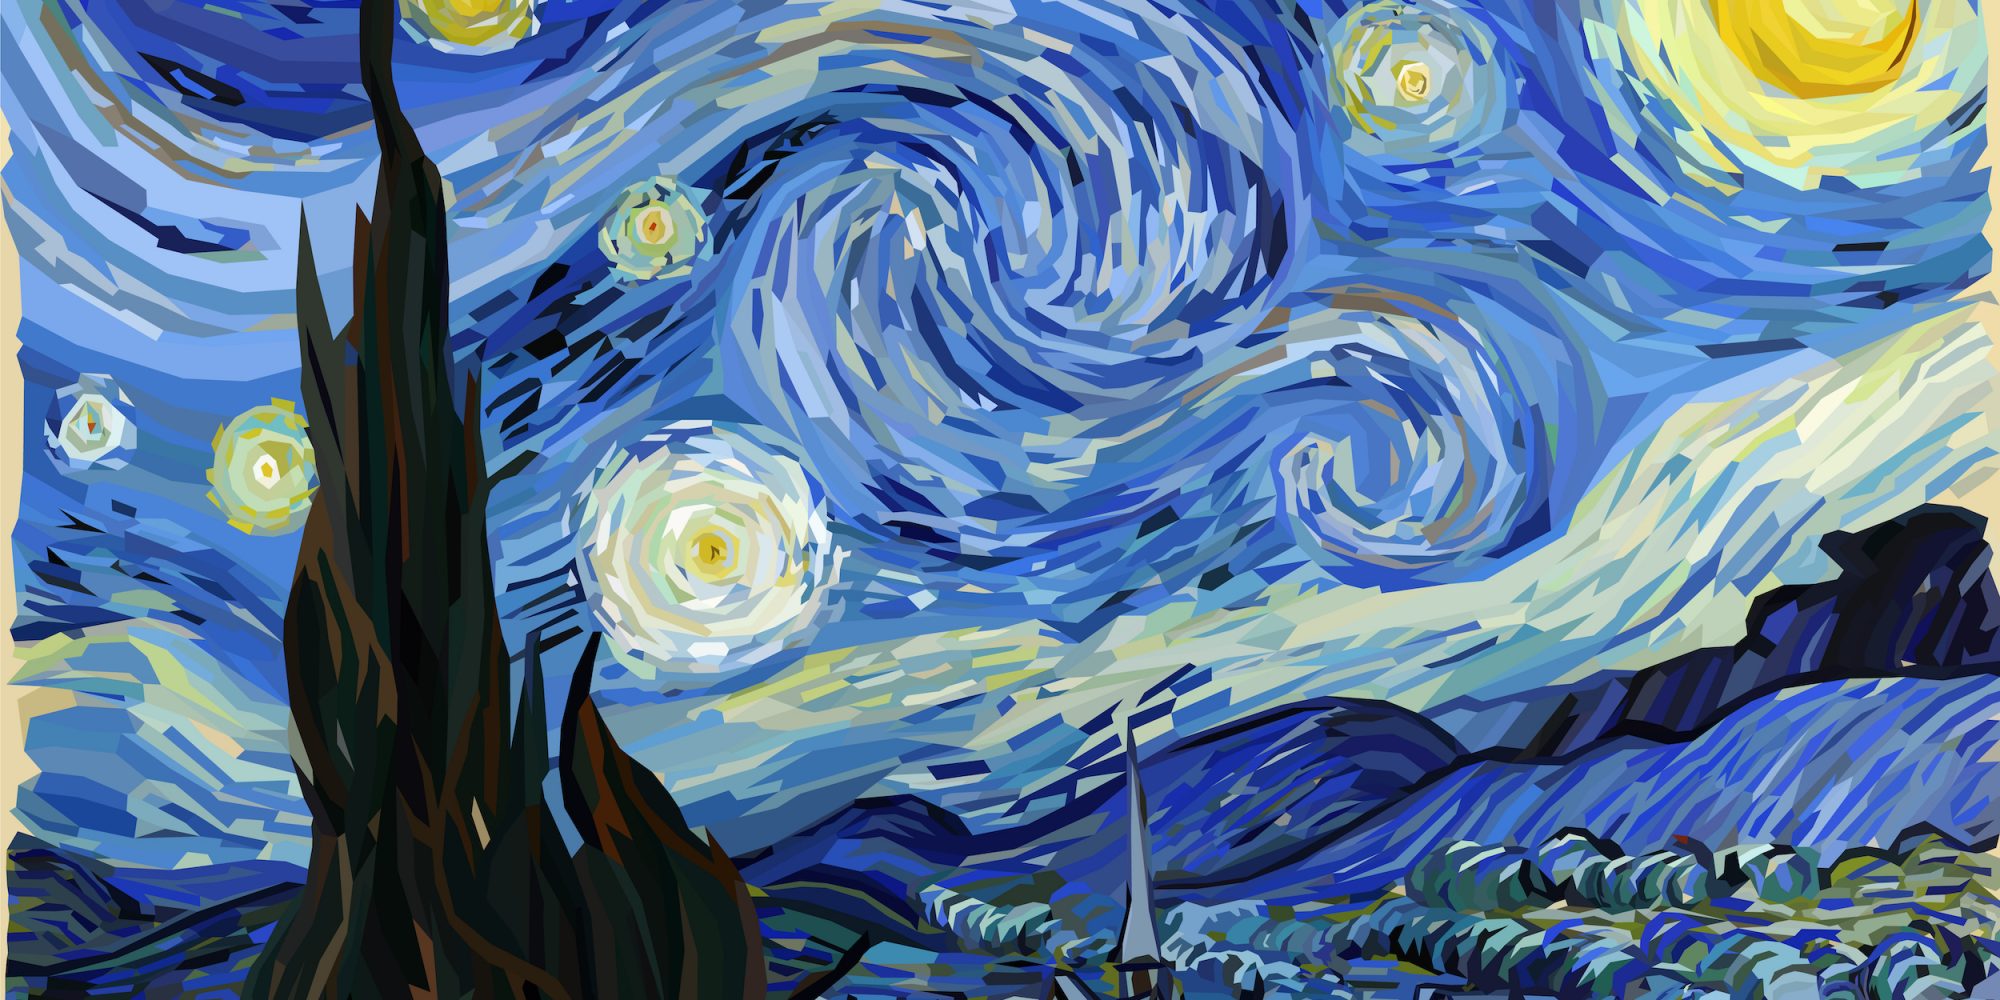 The Starry Night - Vincent van Gogh painting in Low Poly style. Conceptual Polygonal Illustration